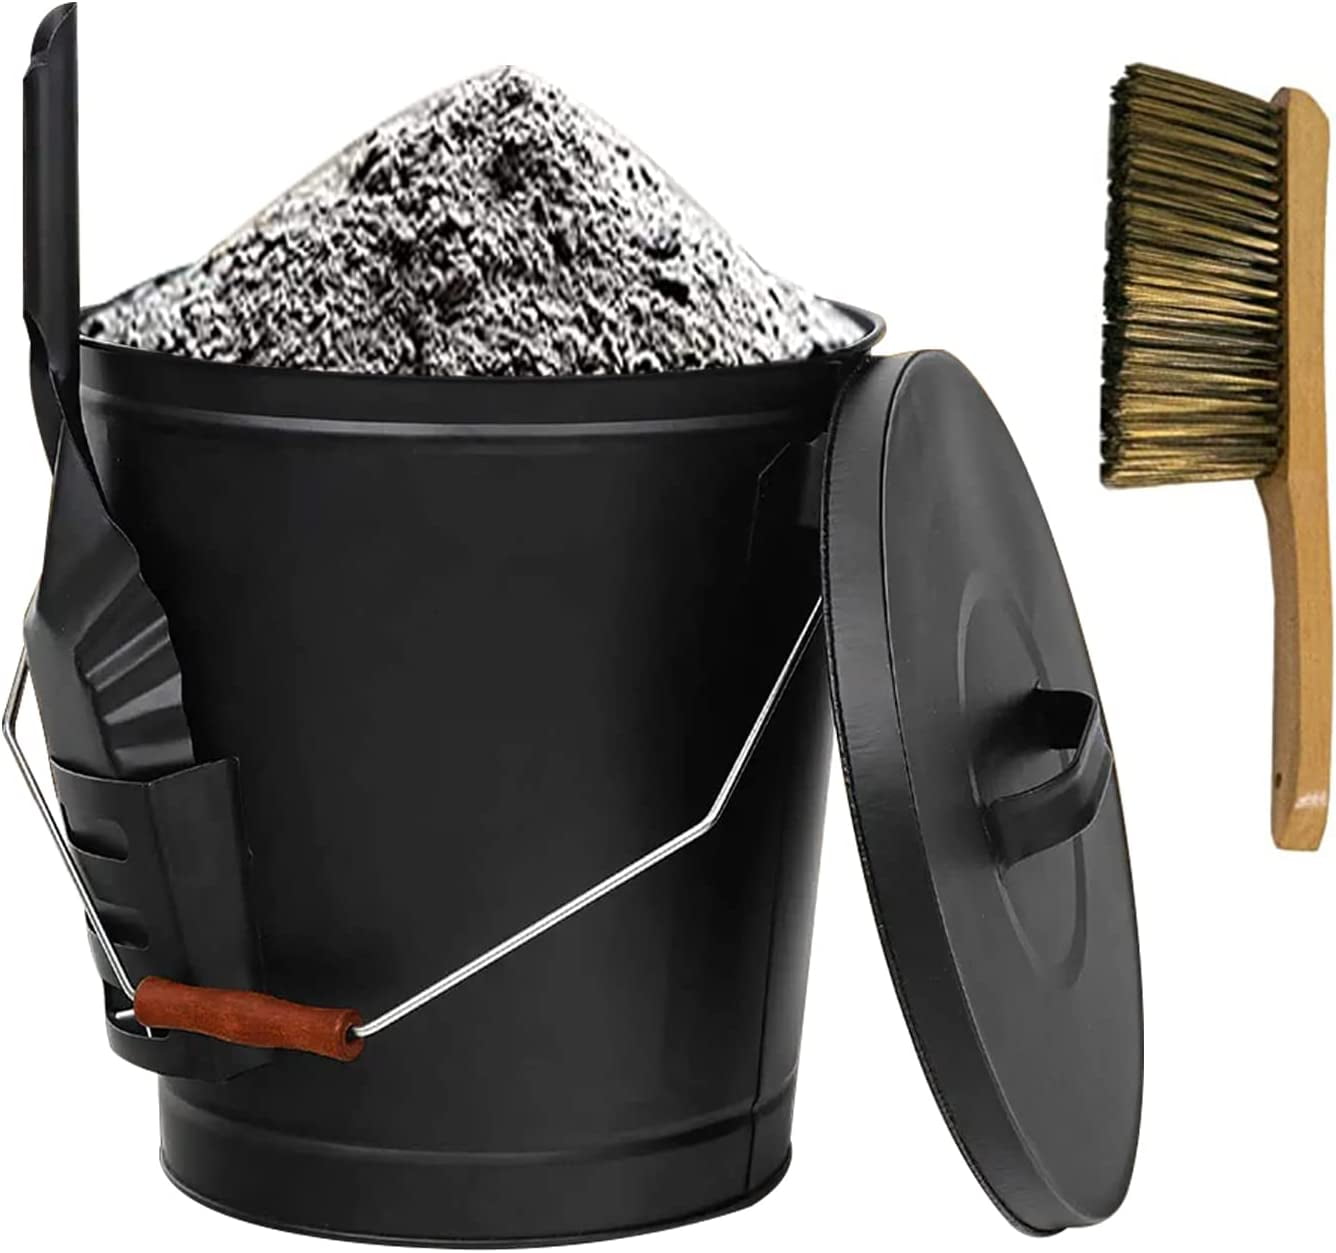 USA Made Fireplace Stove Whisk Broom & Shovel BUCKET With Lid Dustpan Set  Brush Cleaning Coal Ash Pan Coco Fiber Firepit Dixie Cowboy 